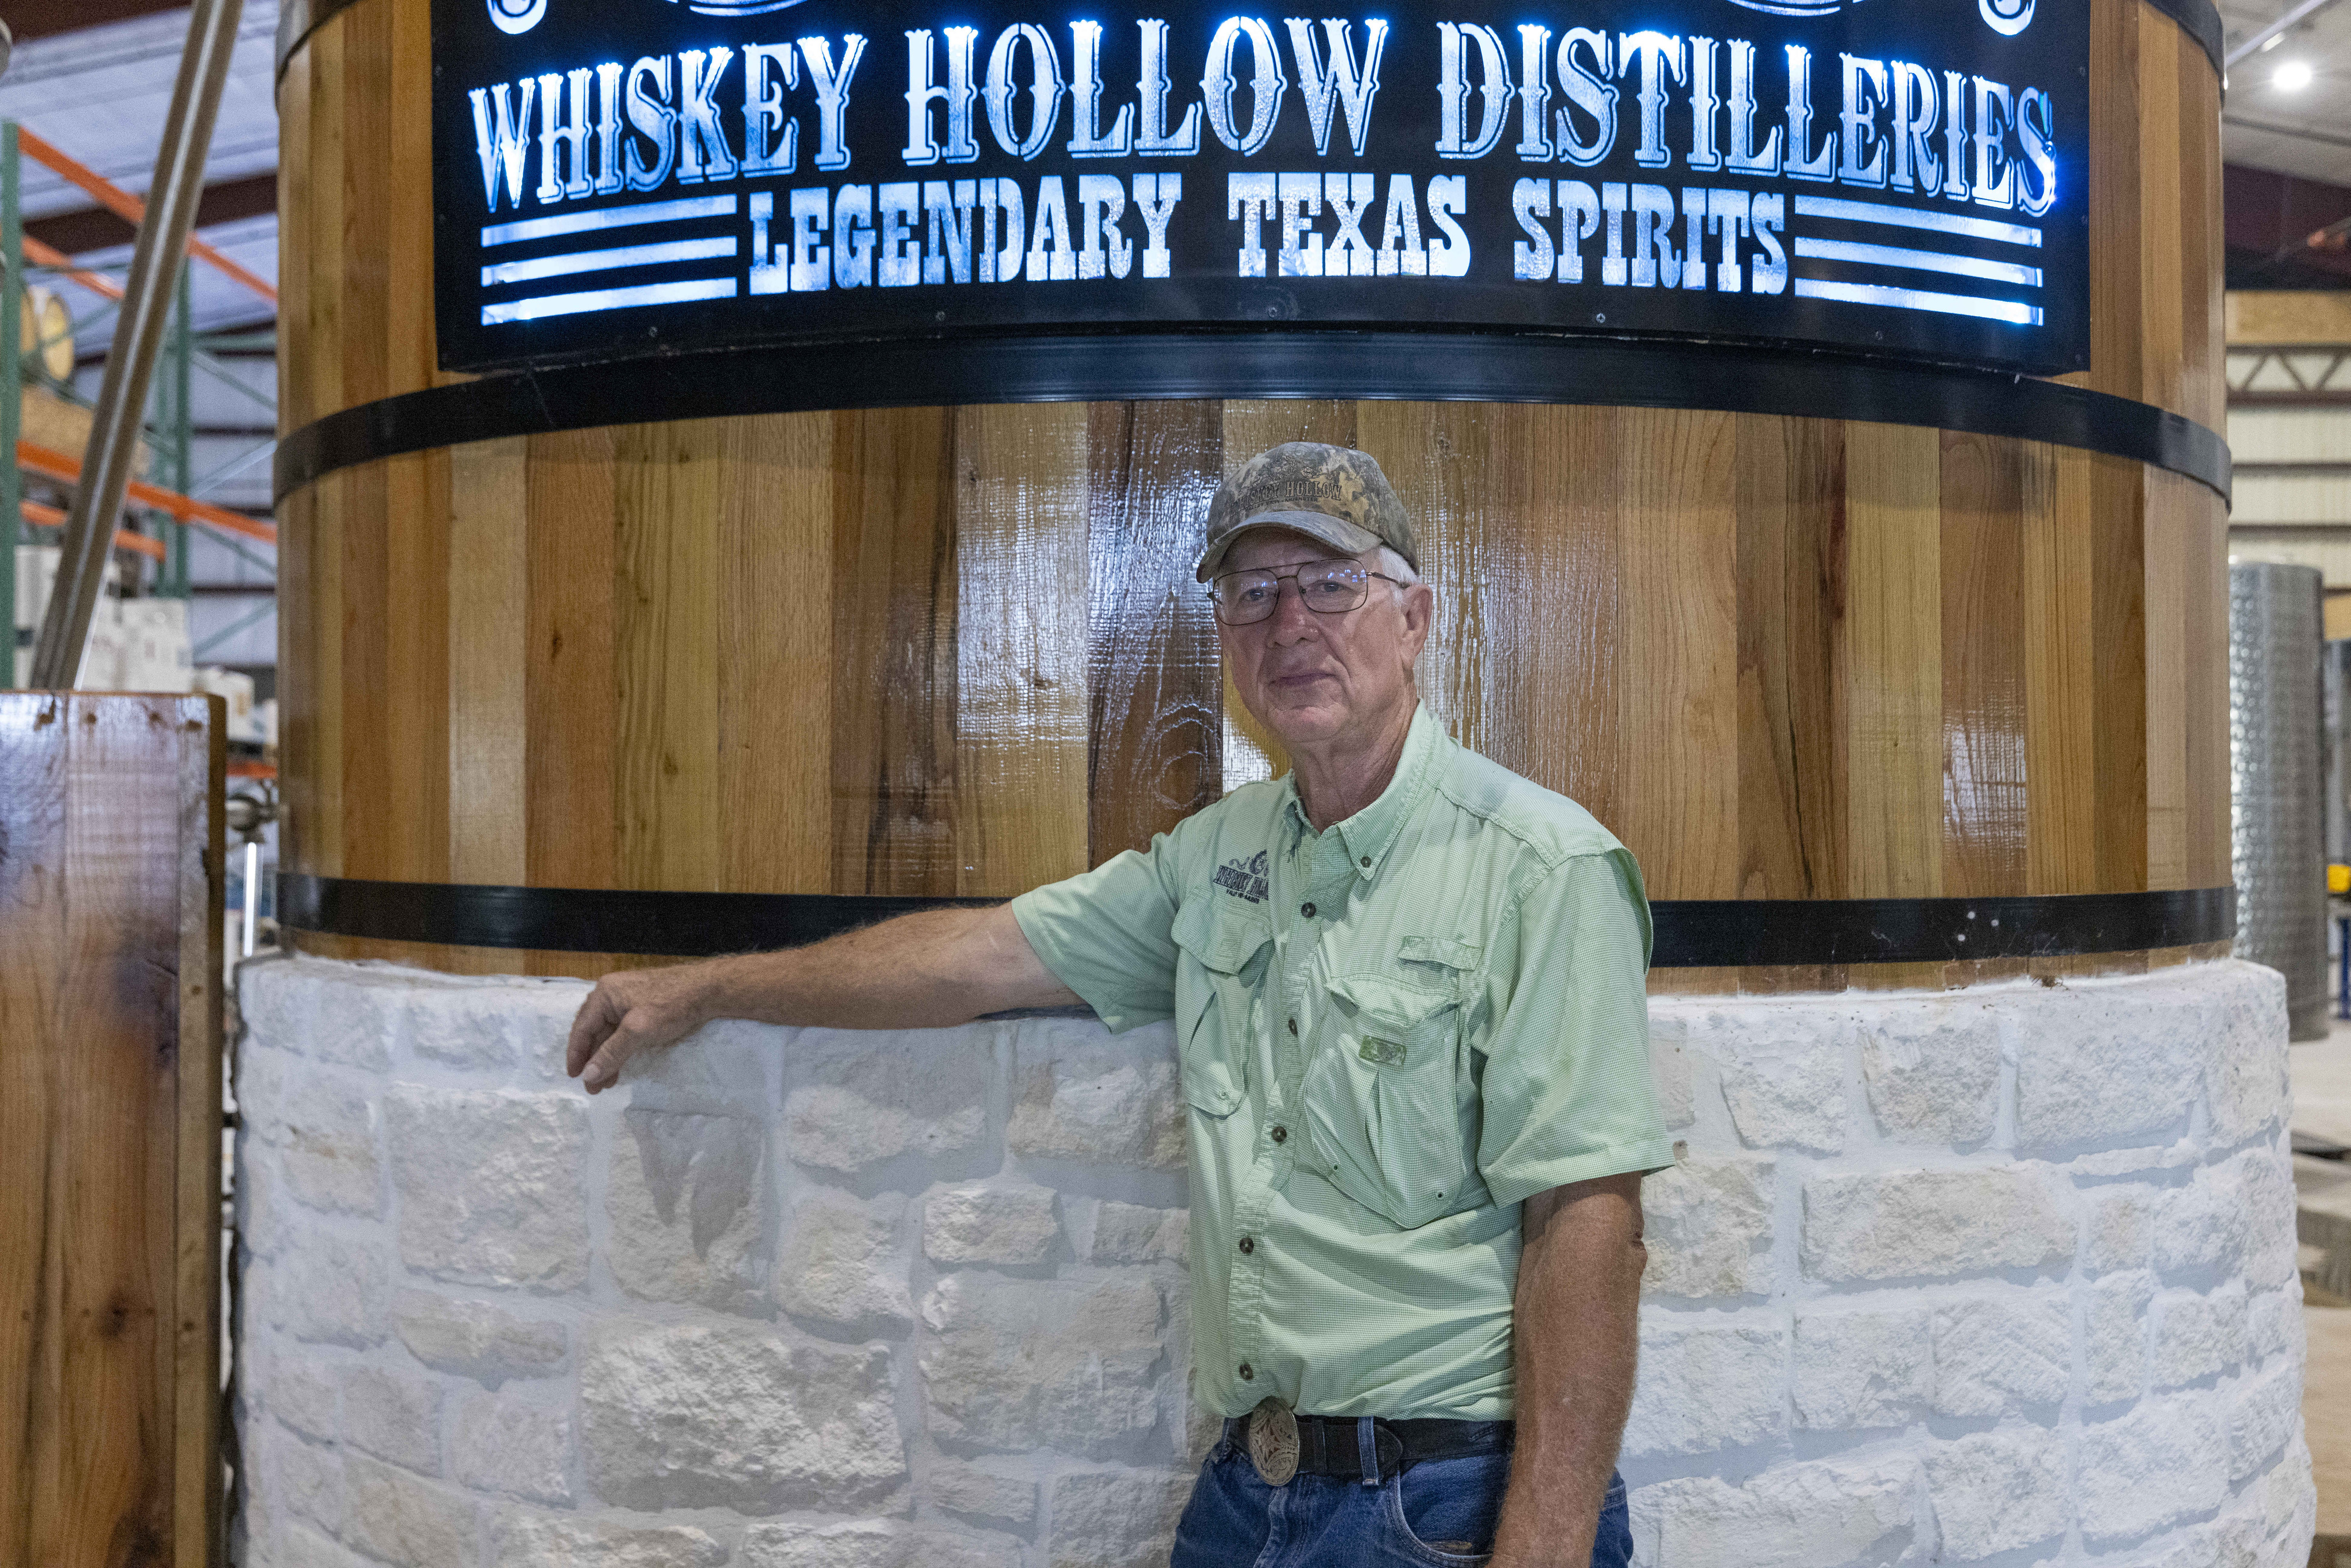 From bourbon to bankruptcy: Why an award-winning Texas distiller